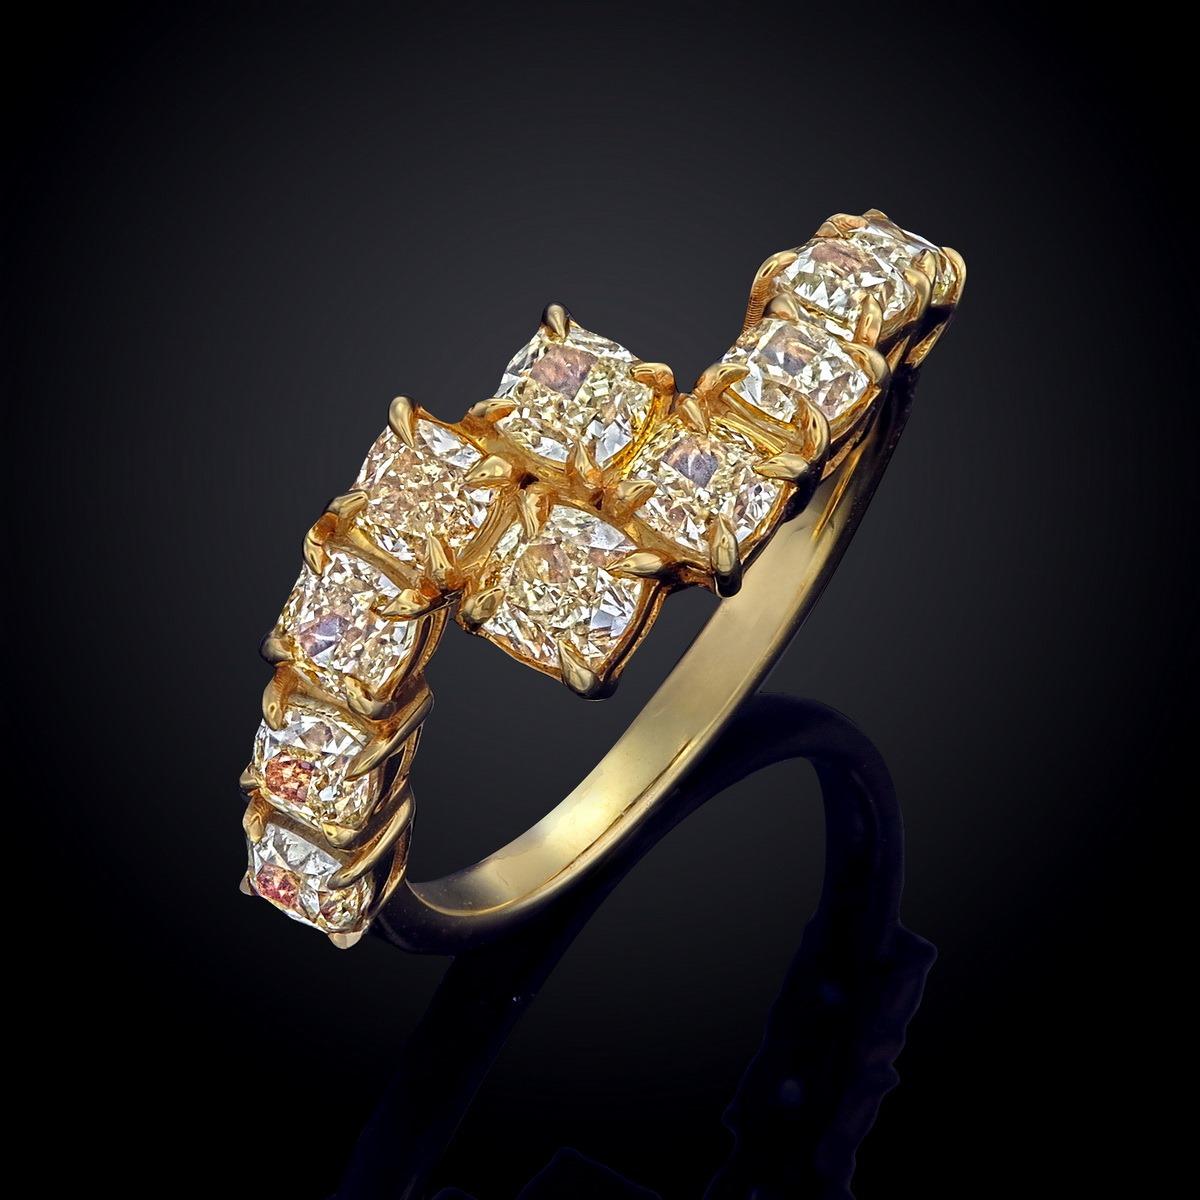 **100% NATURAL FANCY COLOUR DIAMOND JEWELRY**

✪ Jewelry Details ✪

CUSSION YELLOW-  2.38CT

♦ GROSS WEIGHT: 3.62 grams

➛ Metal Type: 18k Gold
➛ Jewelry Type: Fashion ring, Bridal